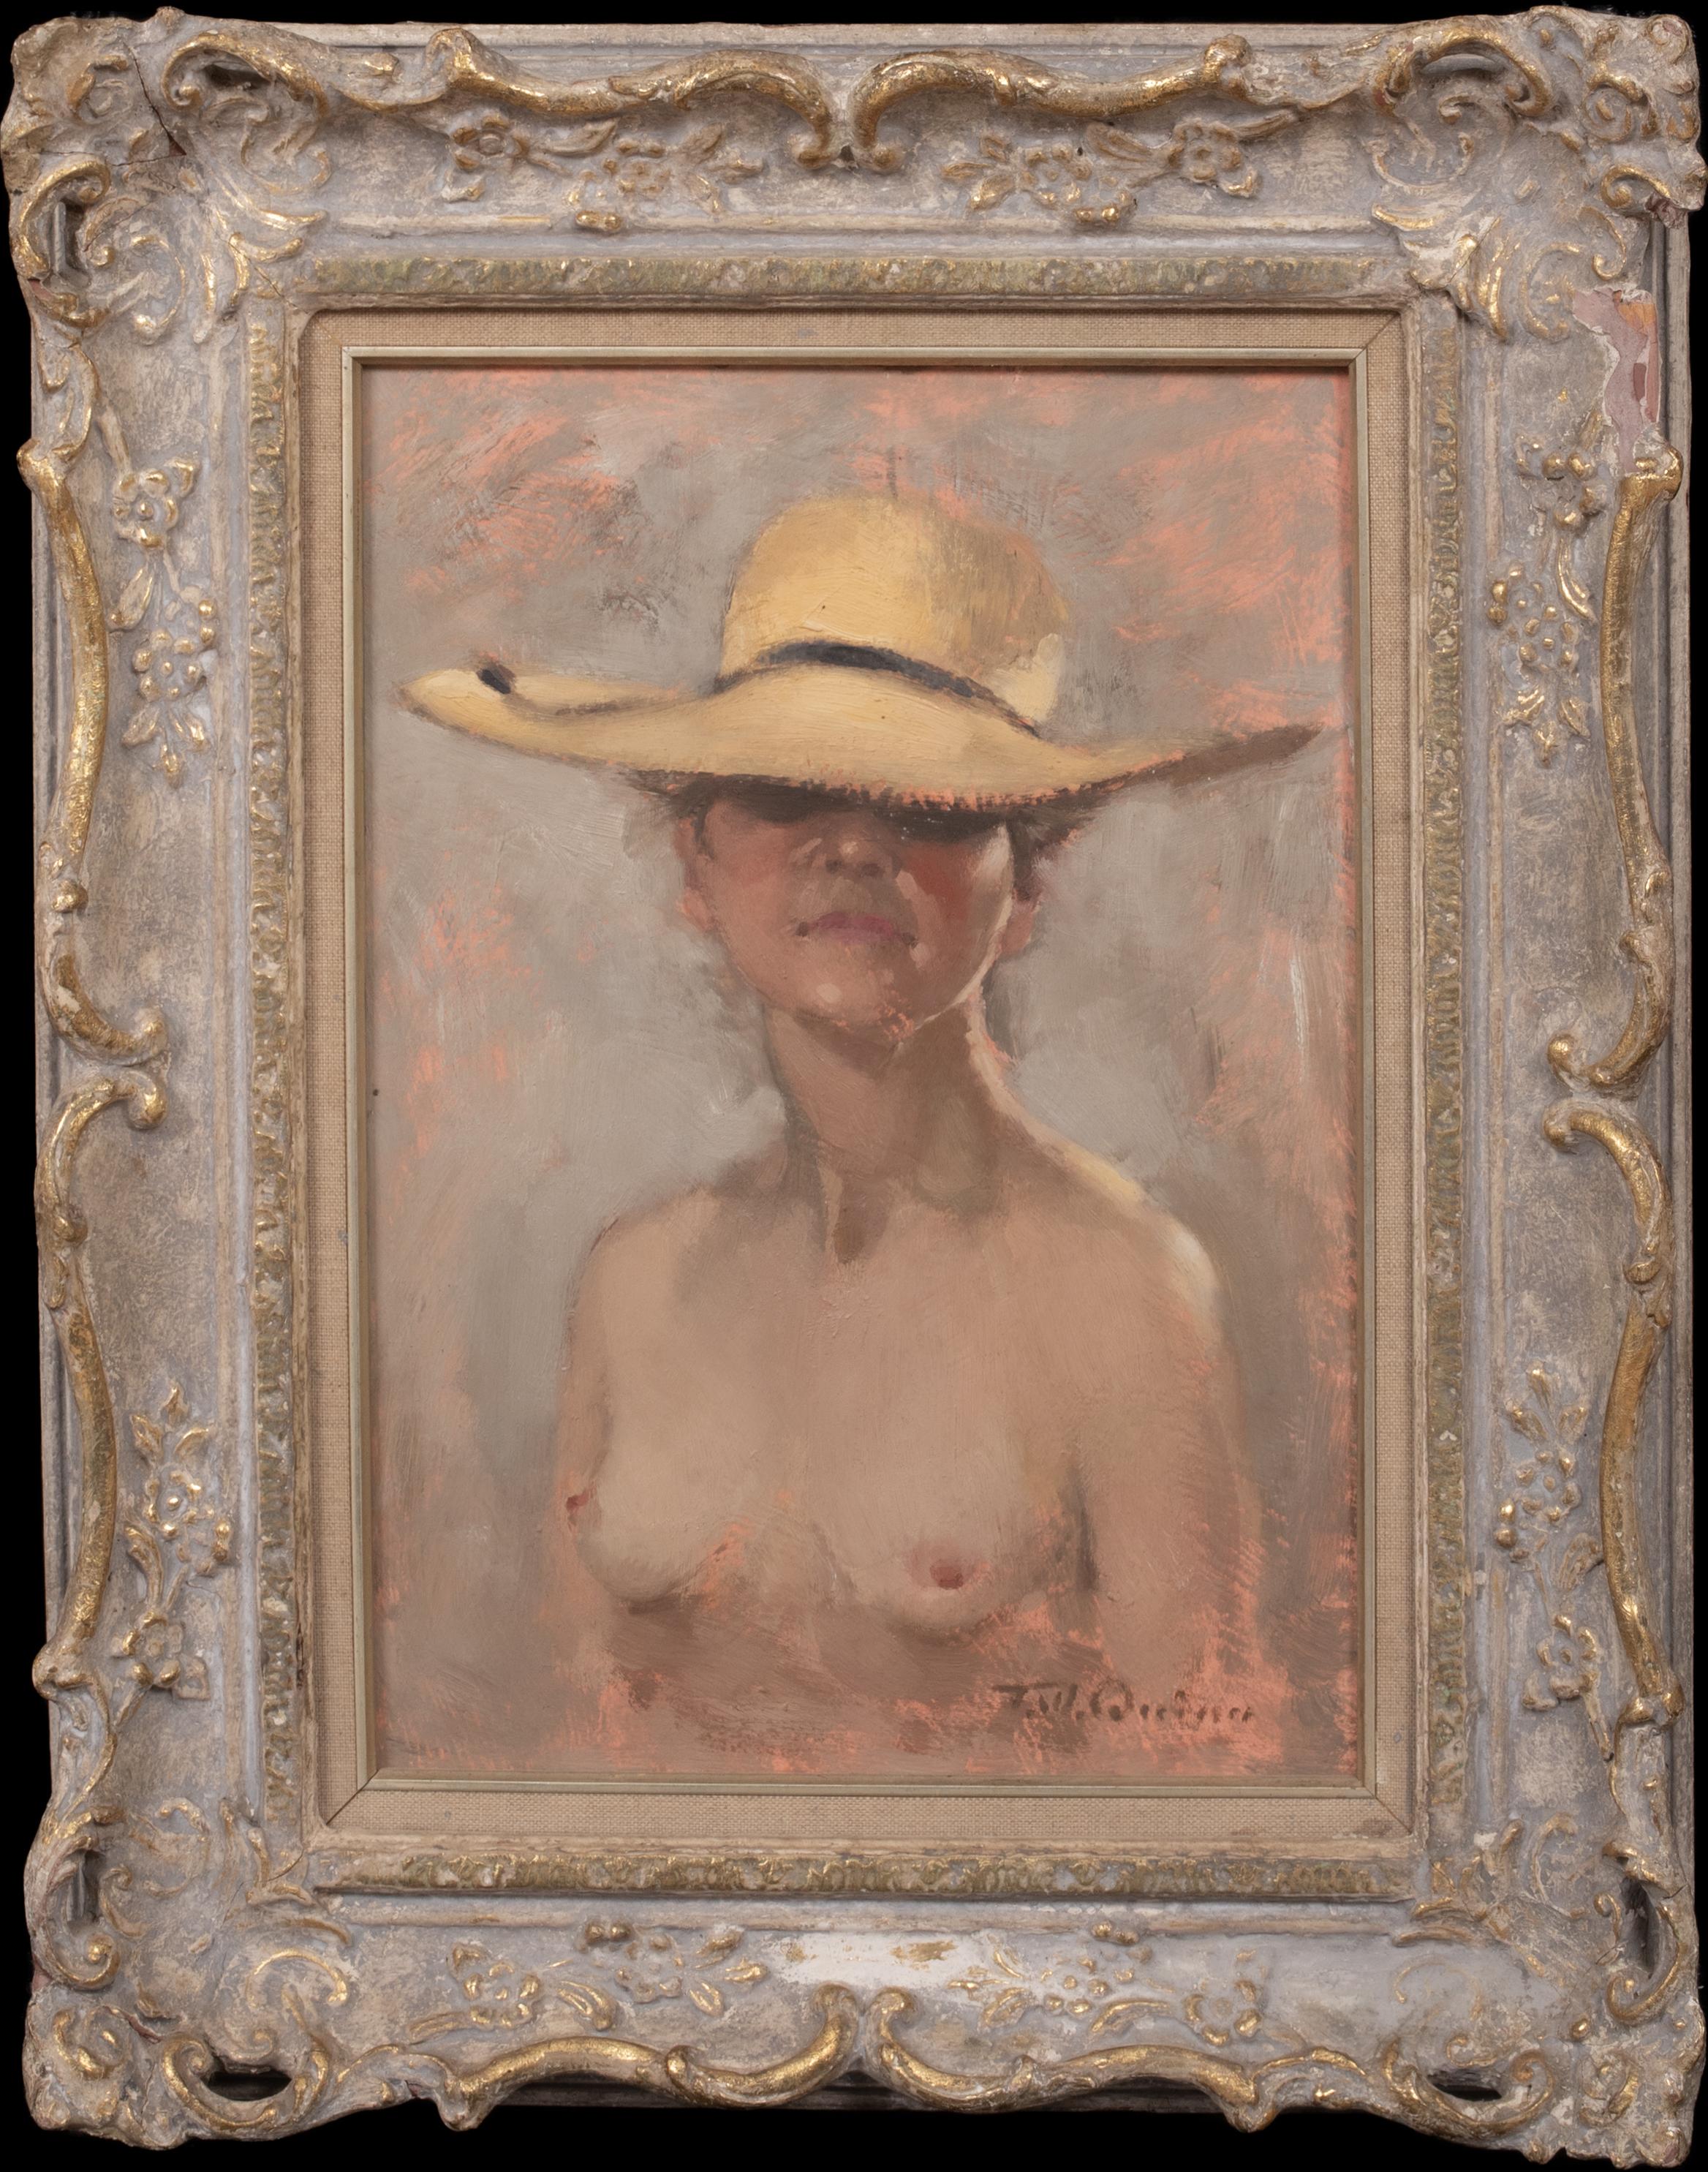 Unknown Portrait Painting - "The Hat", 20th Century   by Tom QUINN (1918-2015) 